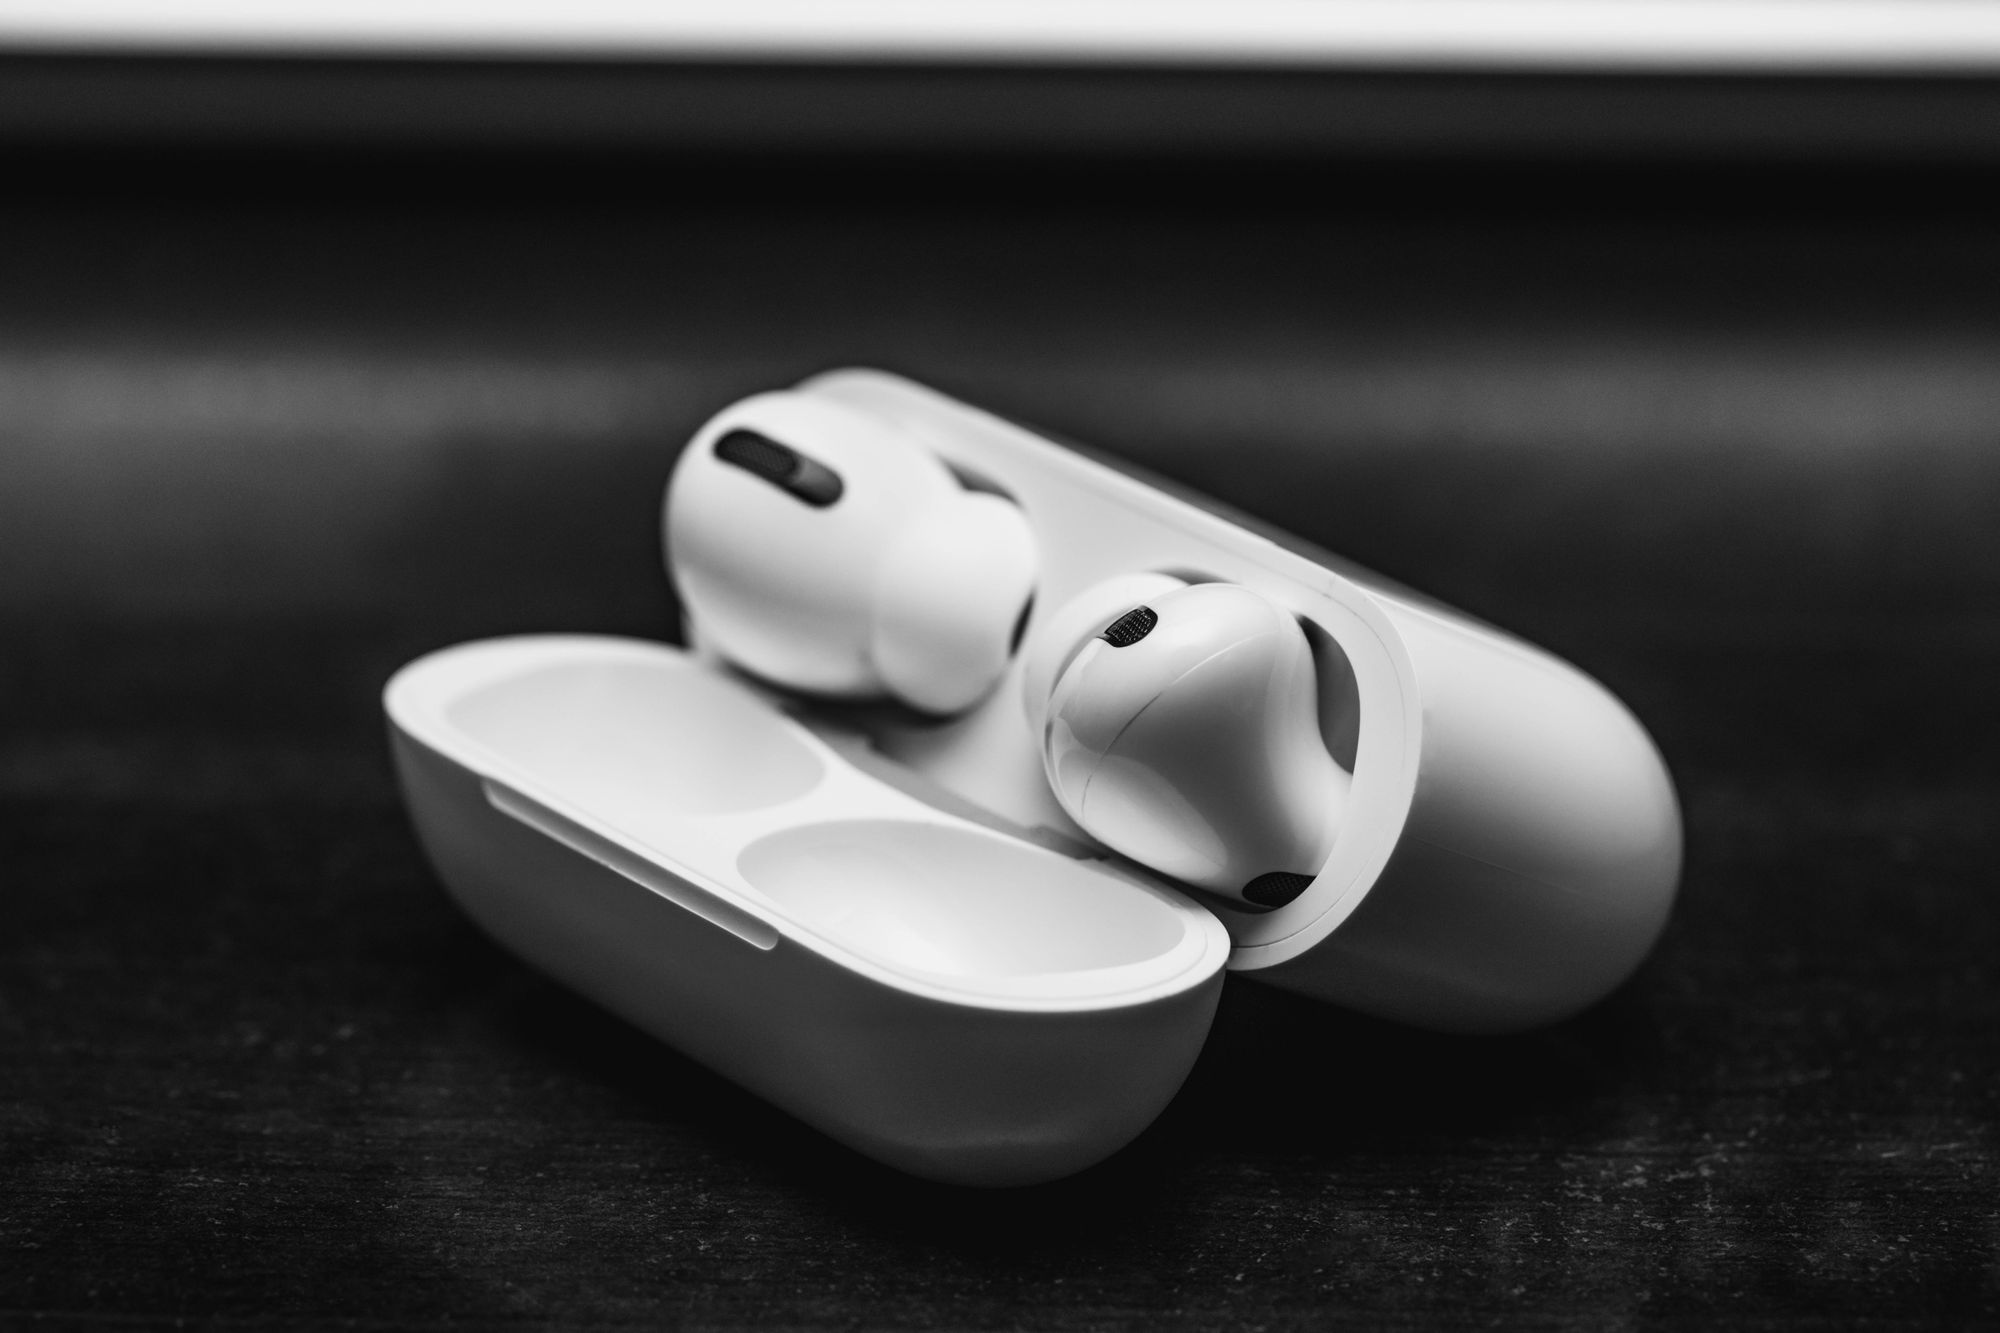 [Review] Apple AirPods Pro: Too Convenient to Ignore